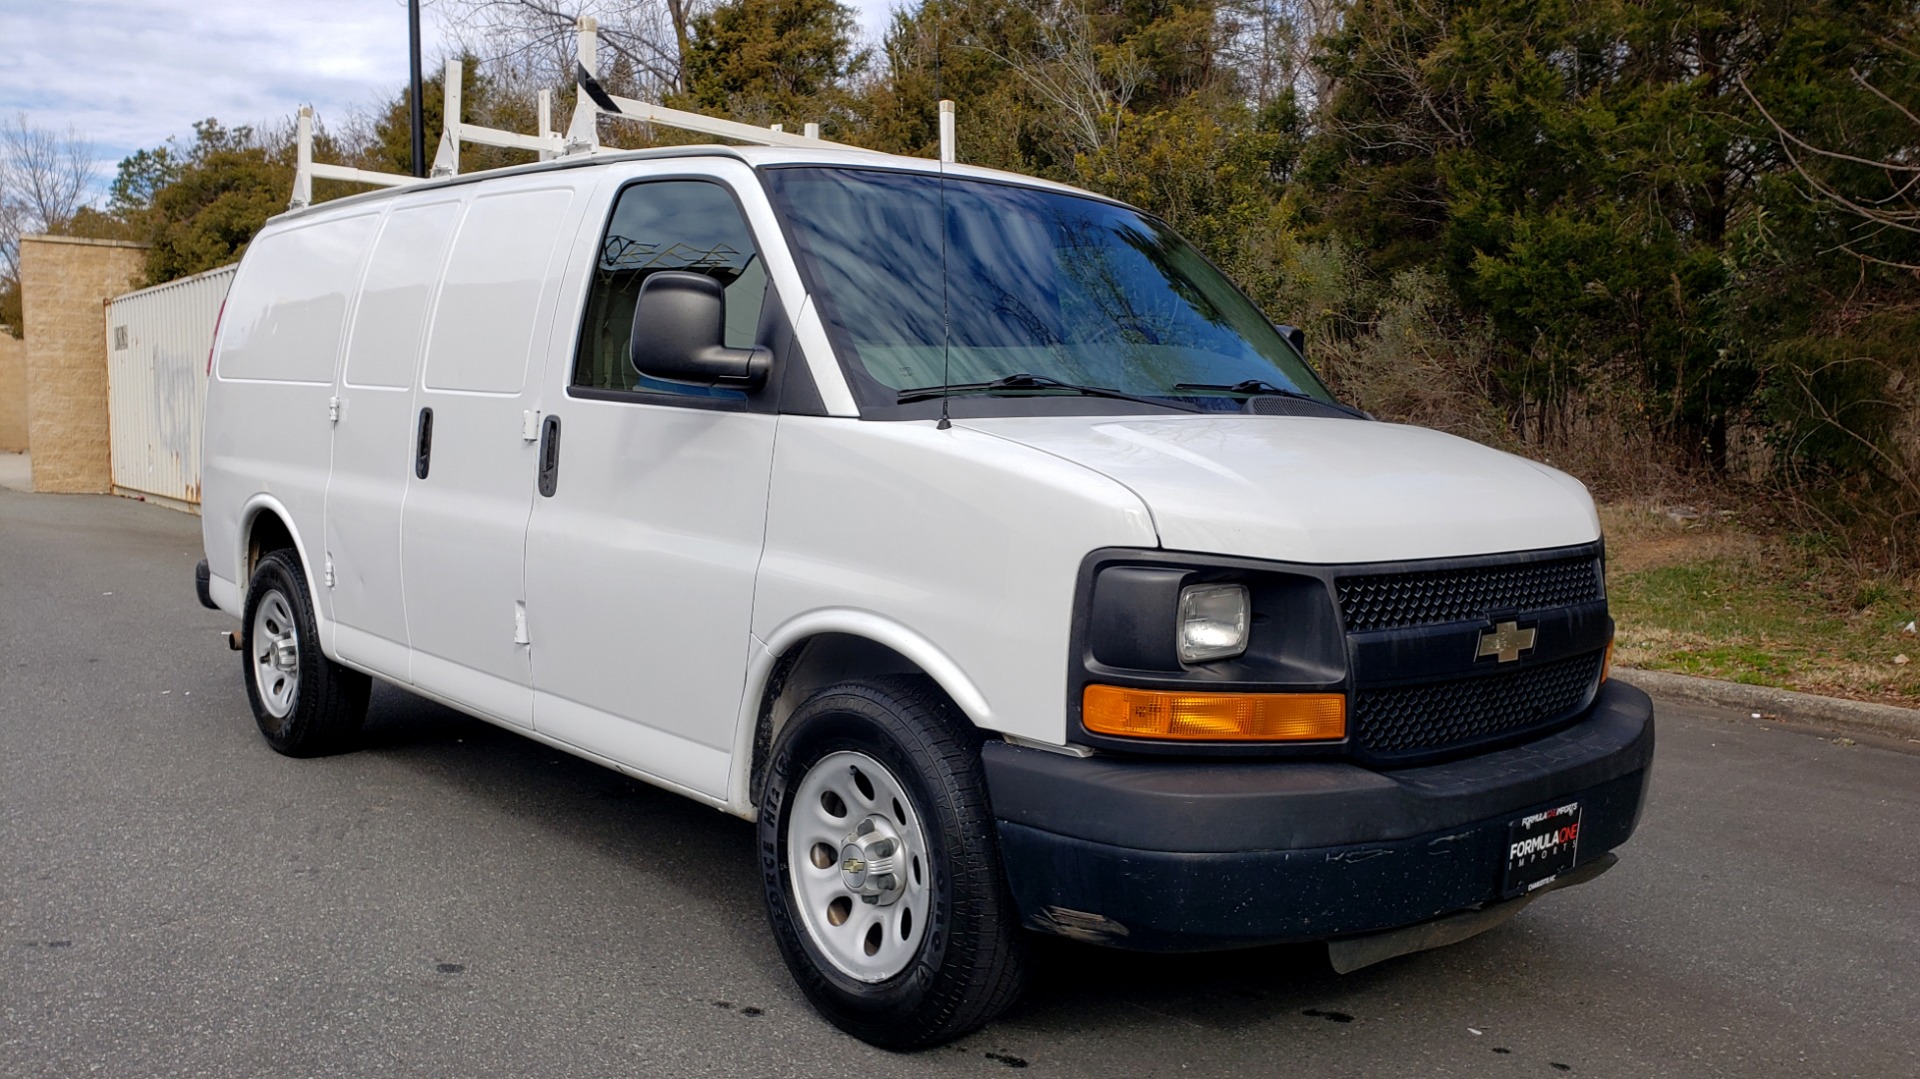 Used 2012 Chevrolet EXPRESS CARGO VAN 1500 / 135 WB / 4.3L V6 / 4-SPD AUTO / ROOF RACK for sale Sold at Formula Imports in Charlotte NC 28227 4